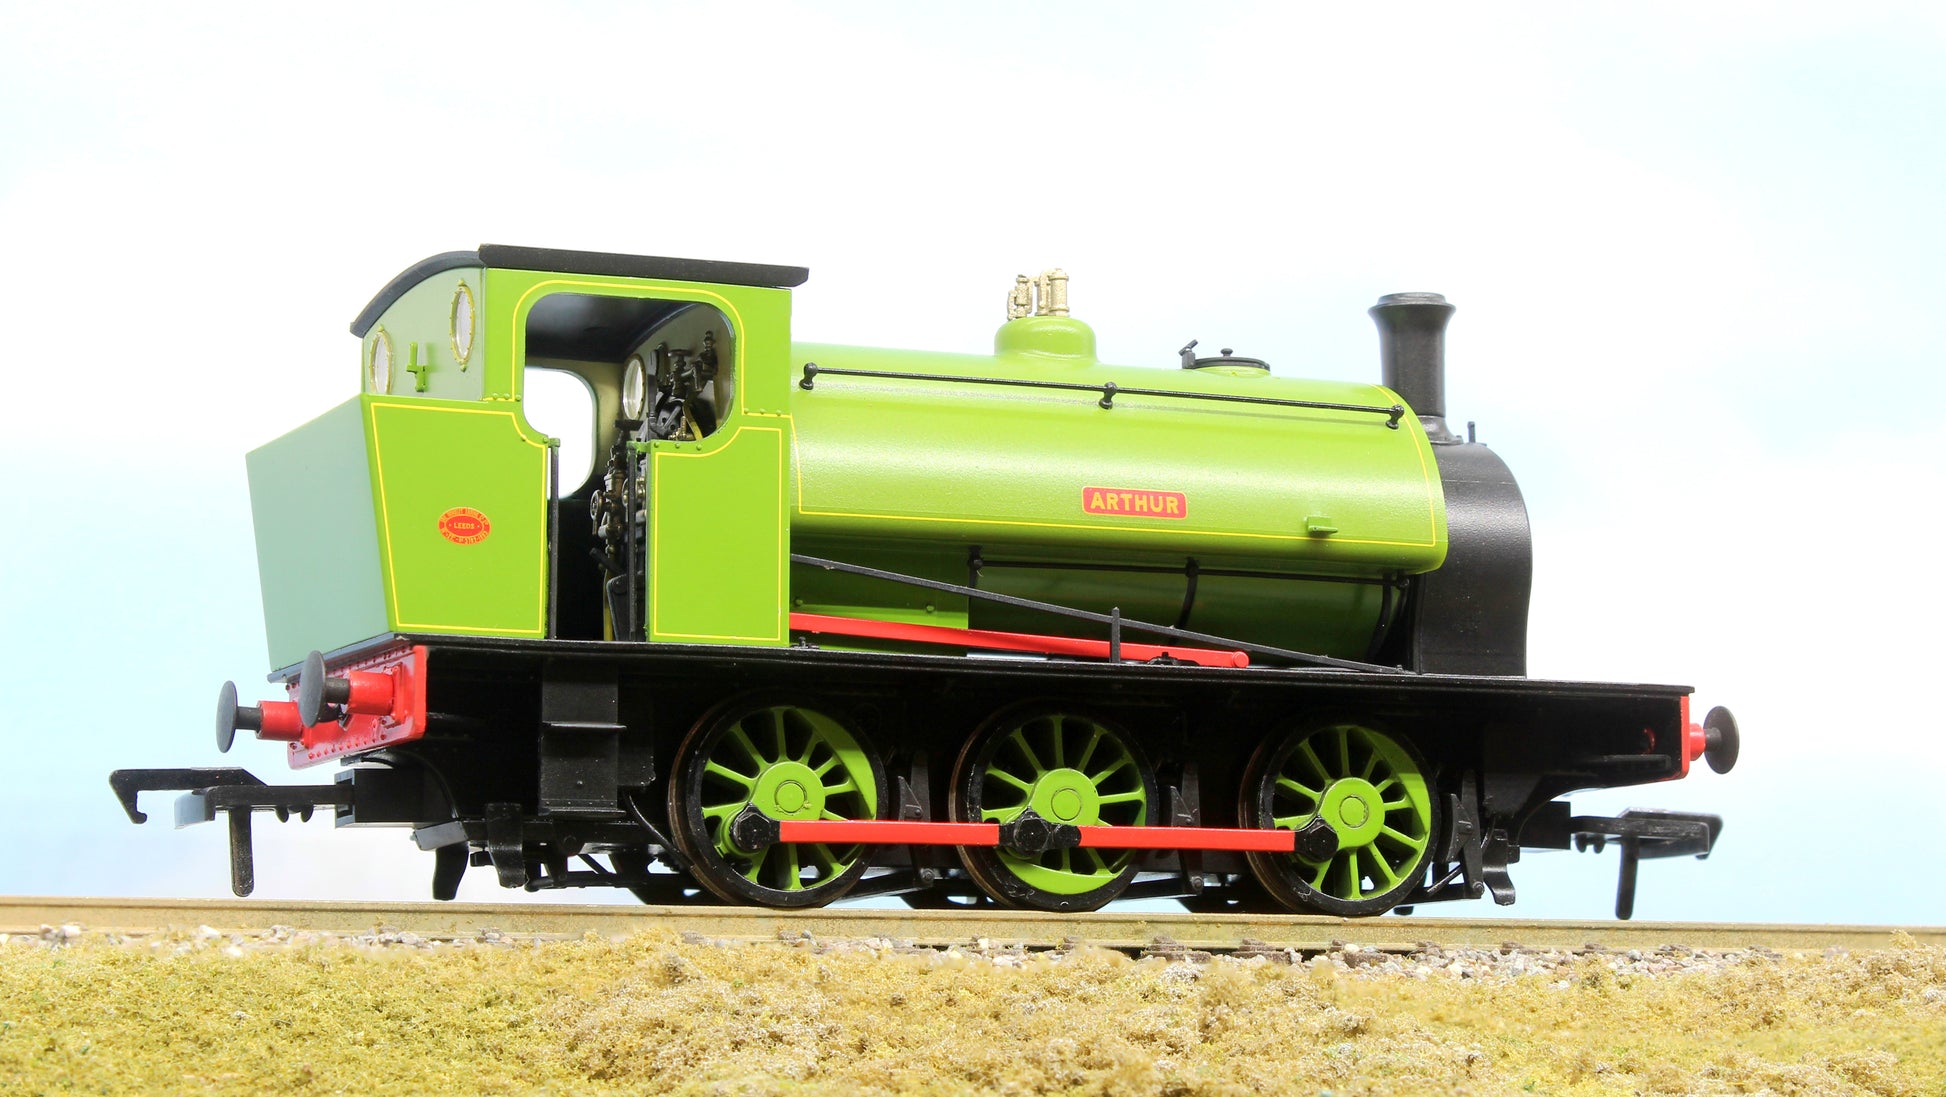 Rapido 903002 - 16" Hunslet - “Arthur” Markham Main Colliery Lined Green - DCC Ready - Chester Model Centre